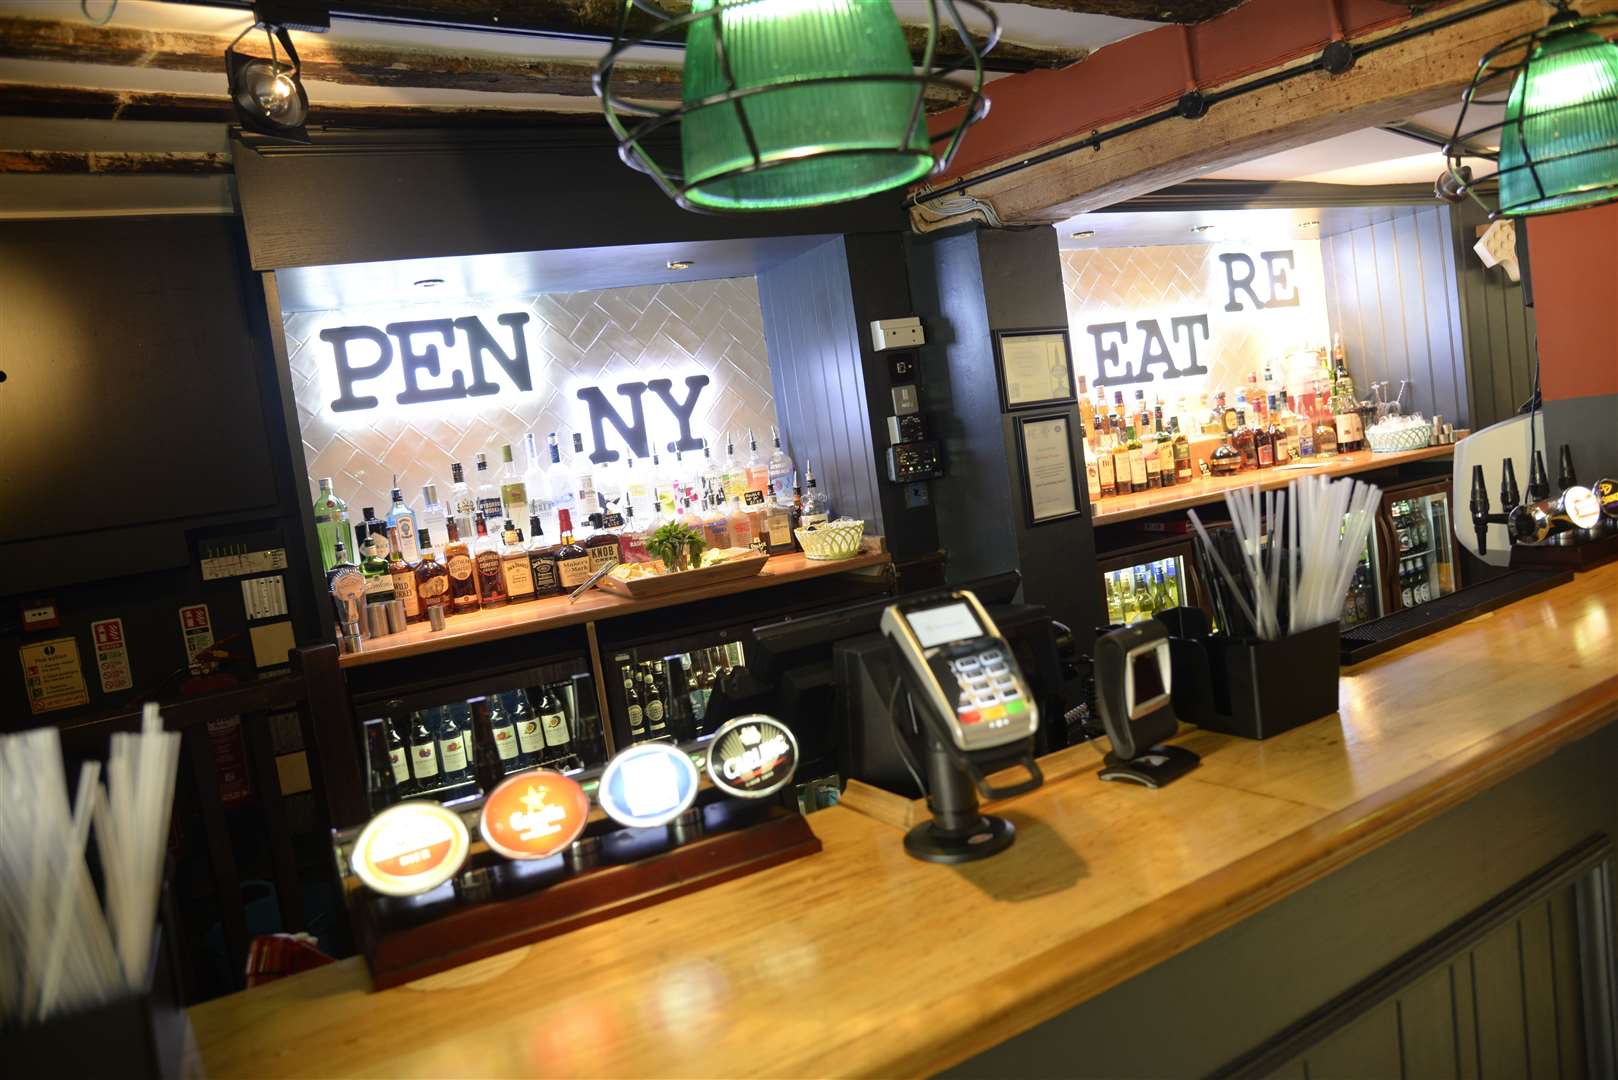 The Penny Theatre in Northgate, Canterbury, is on the hunt for the weird and wonderful